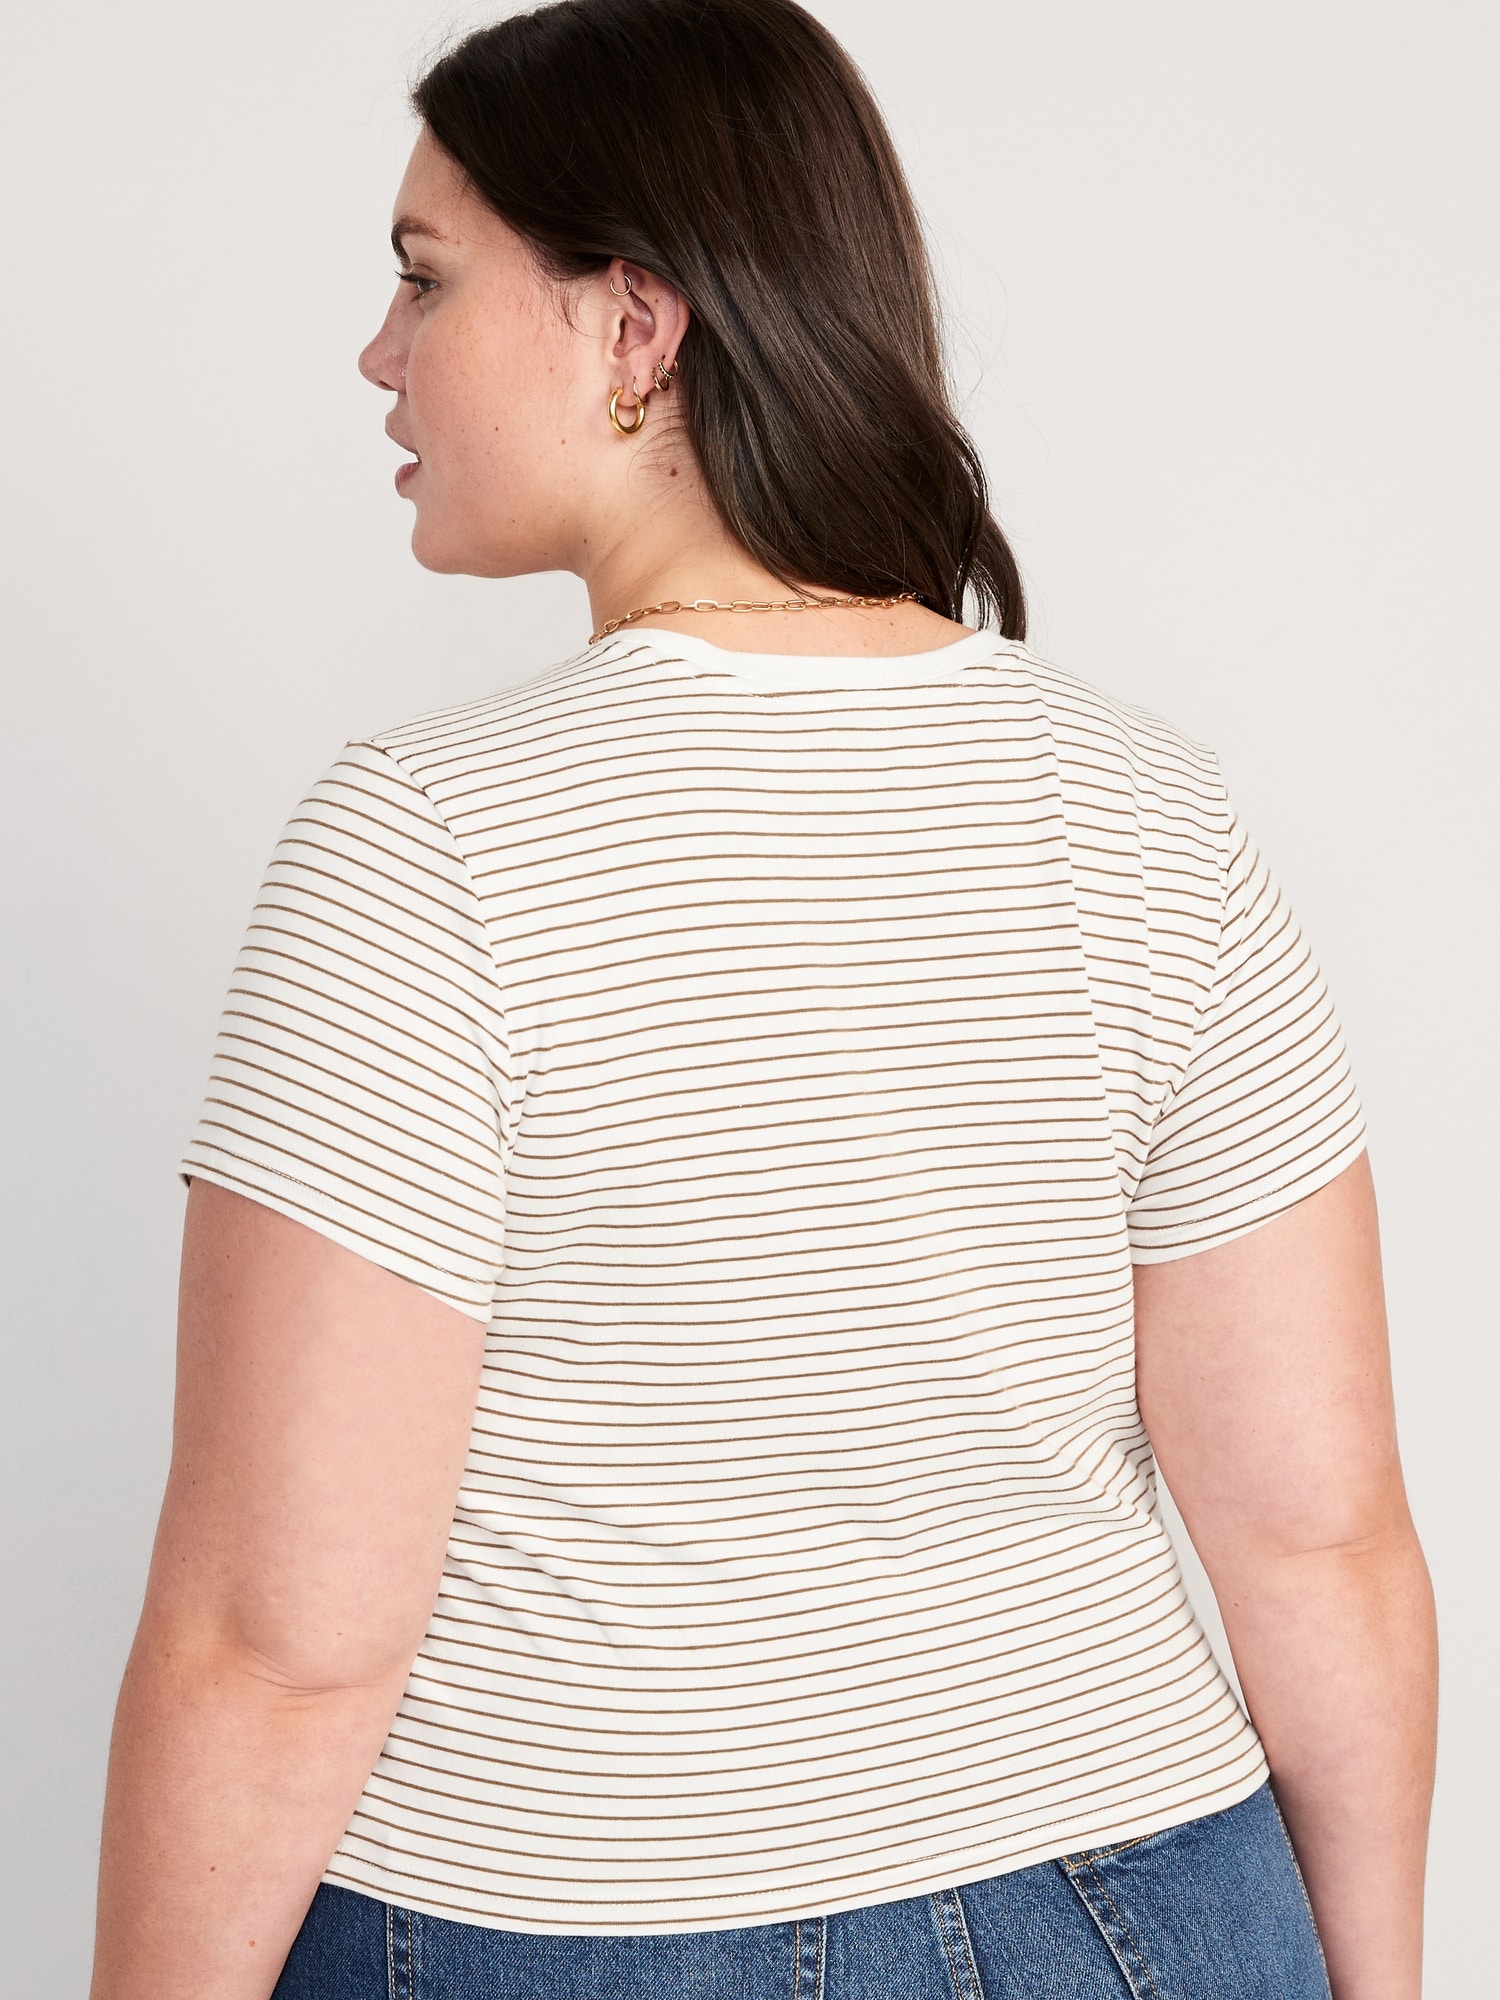 Navy T-Shirt Old | Cropped Striped for Women Slim-Fit